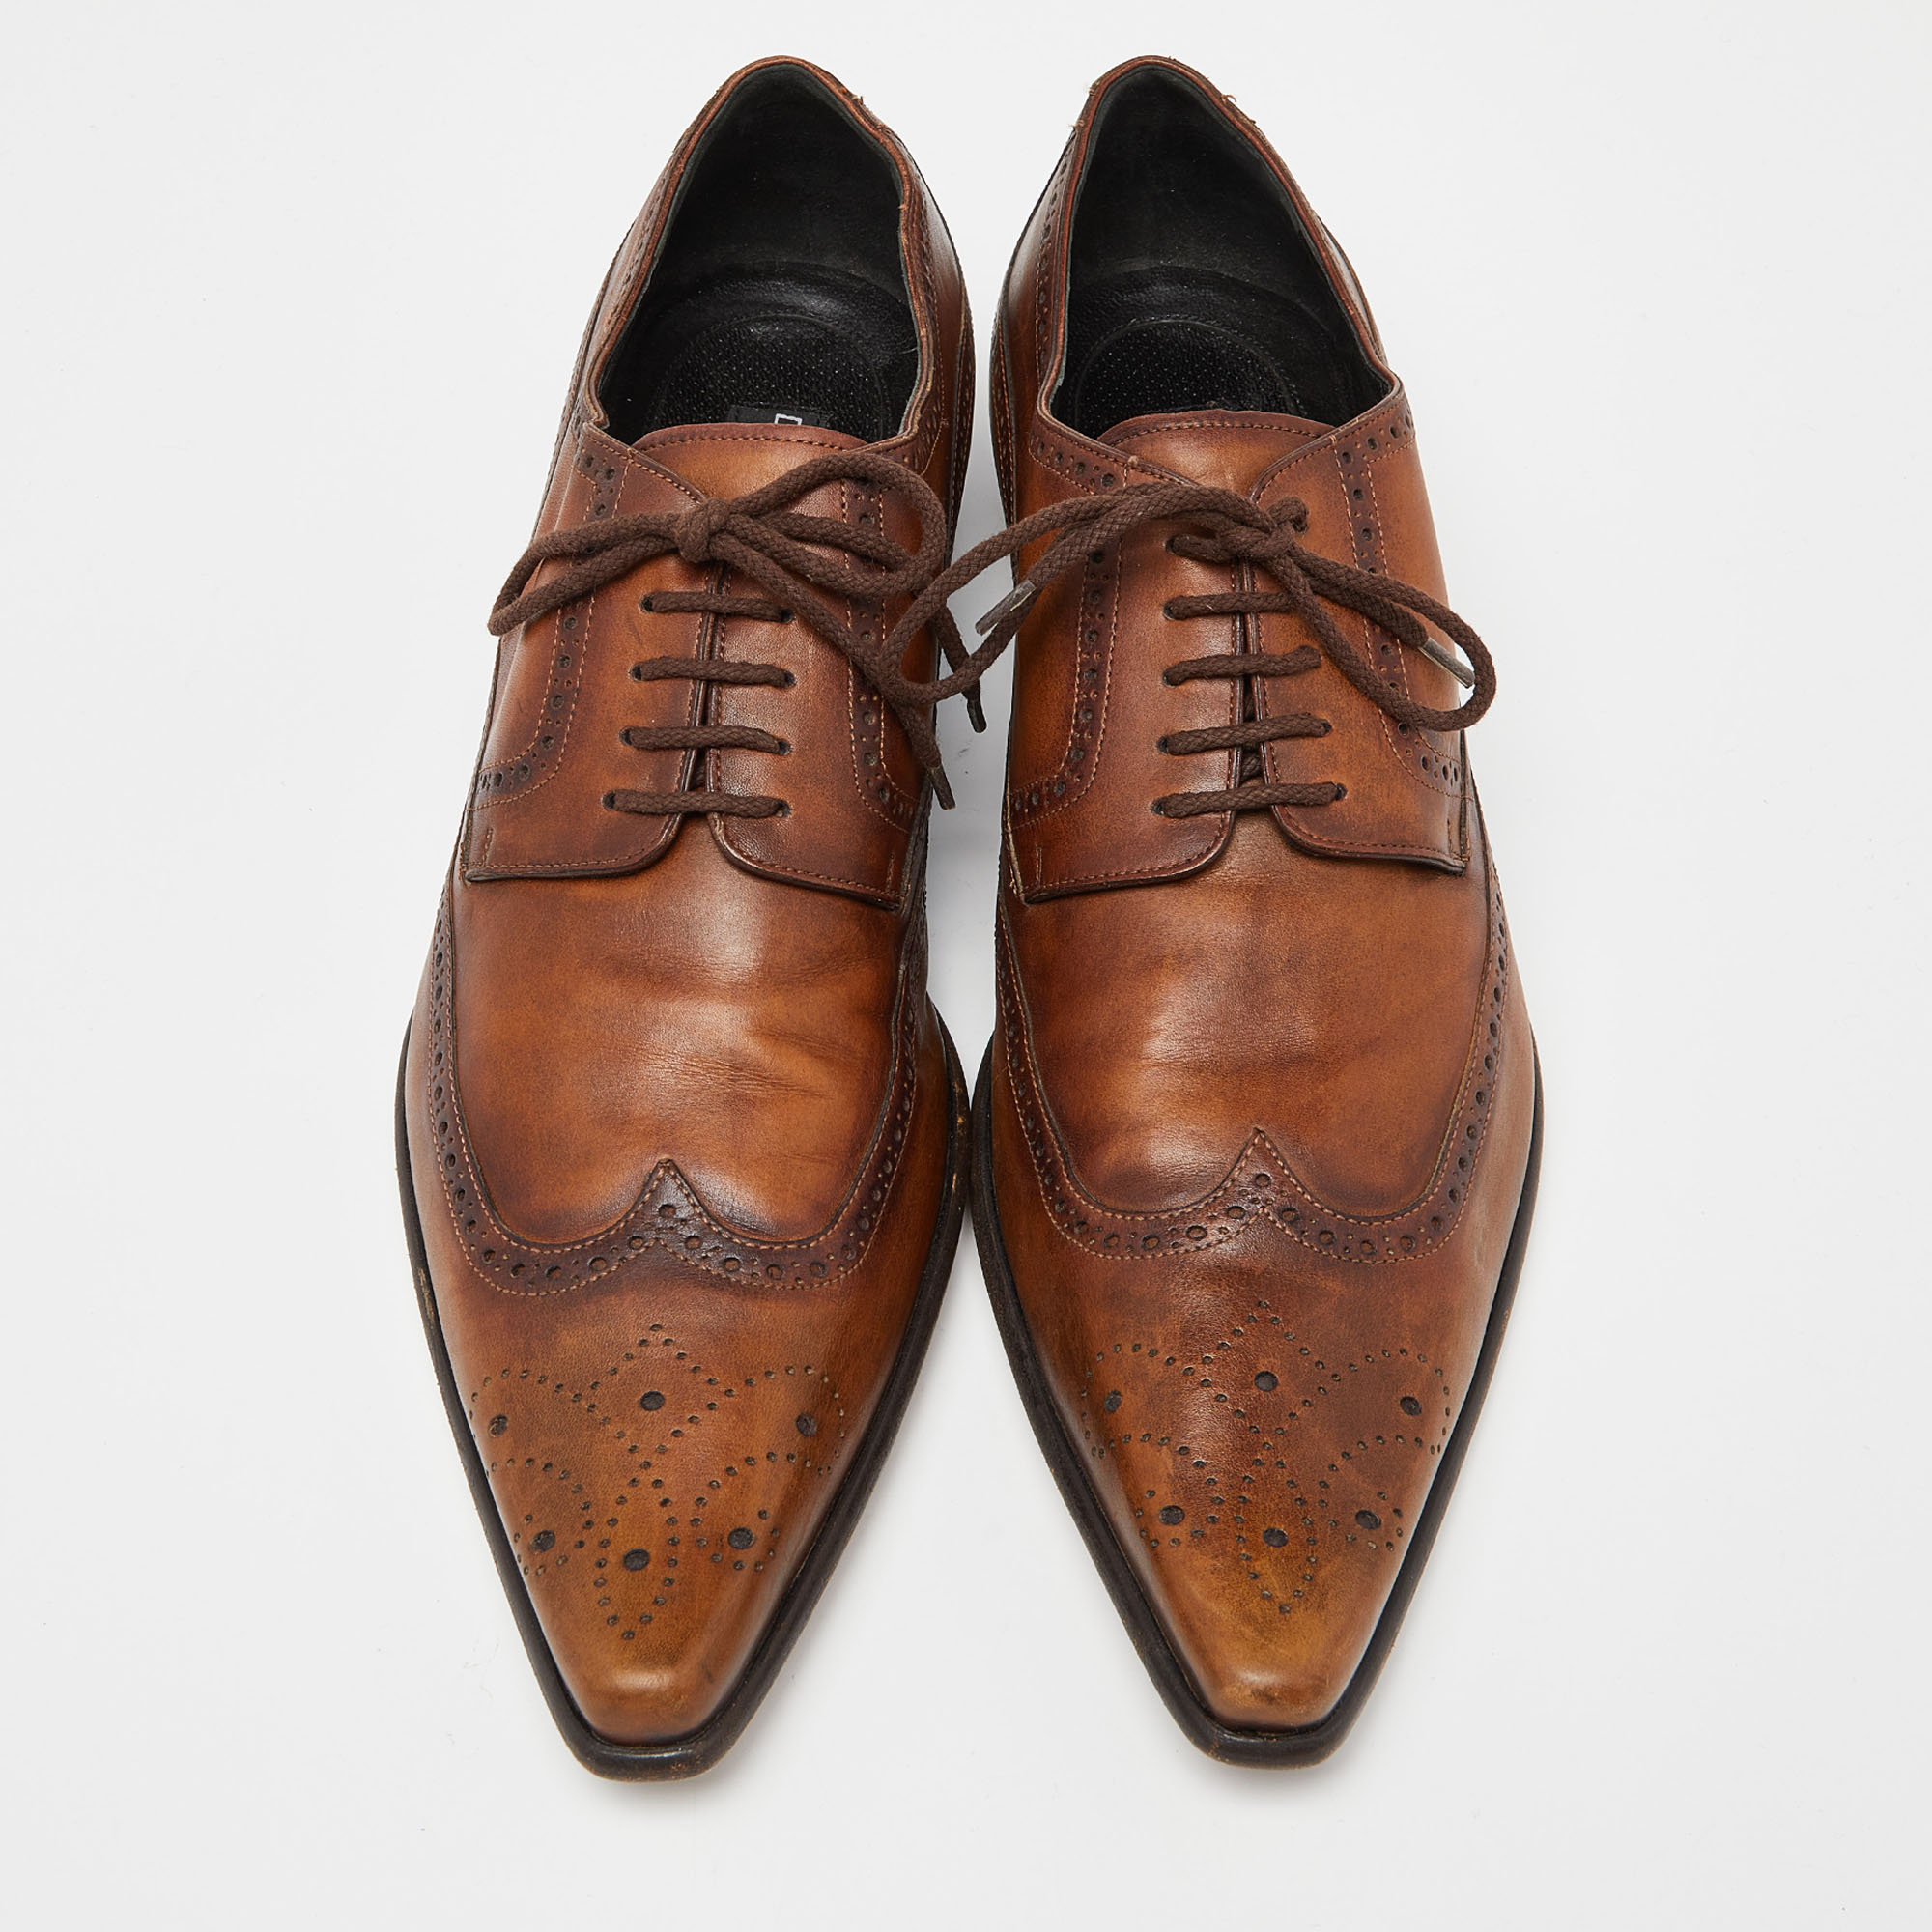 Dolce & Gabbana Brown Leather Brogue Lace Up Oxford Size 43